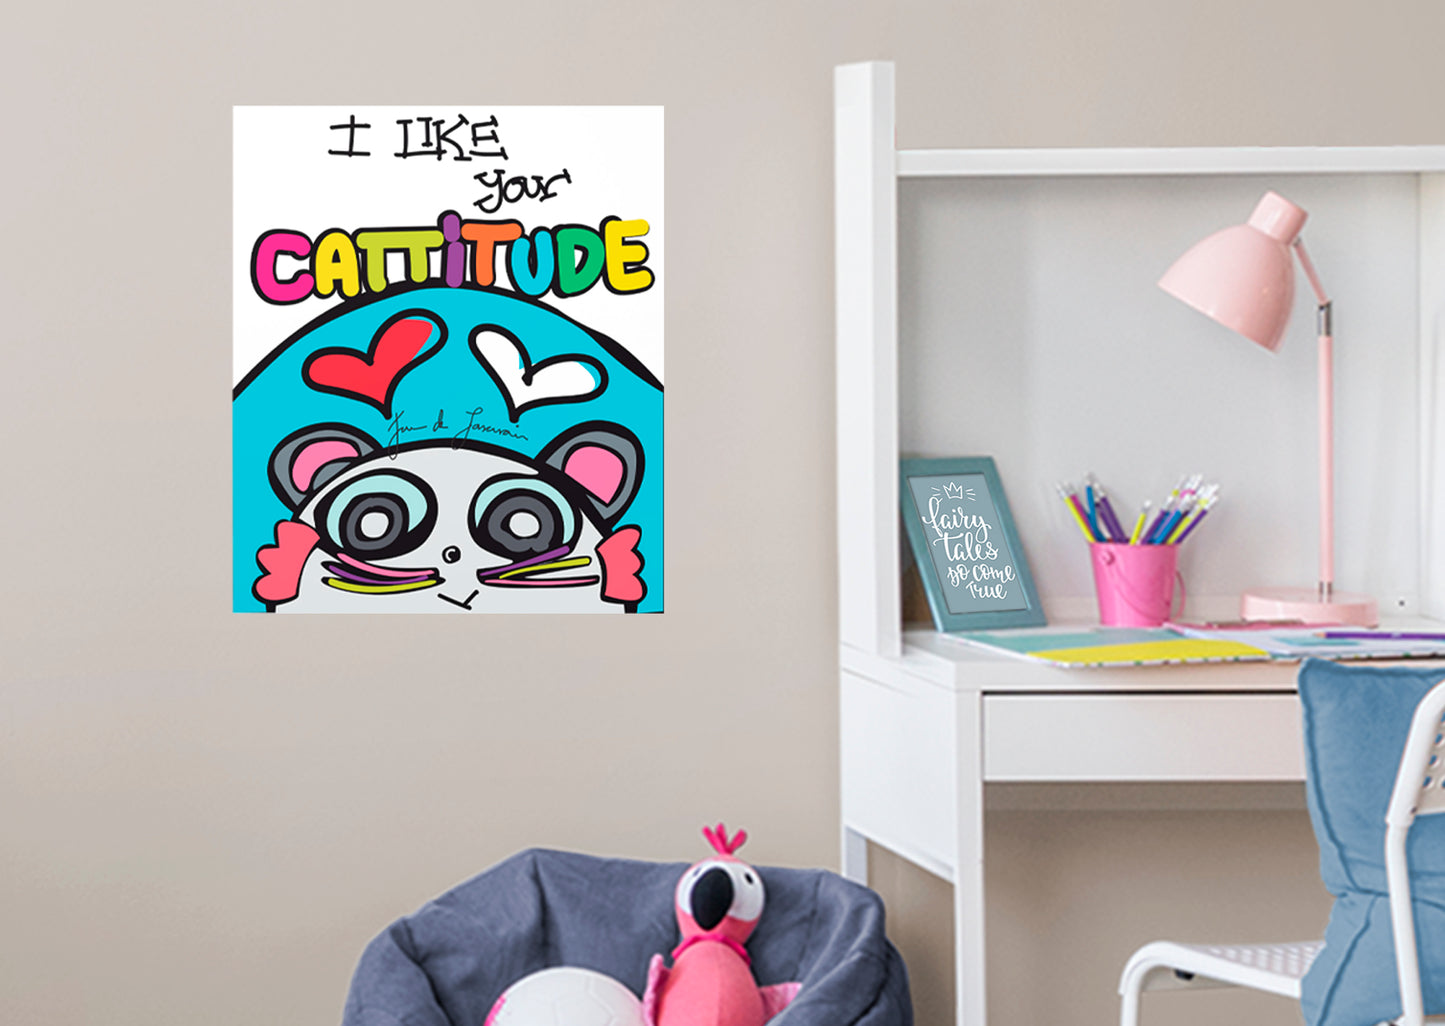 Dream Big Art:  Cattitude Mural        - Officially Licensed Juan de Lascurain Removable Wall   Adhesive Decal